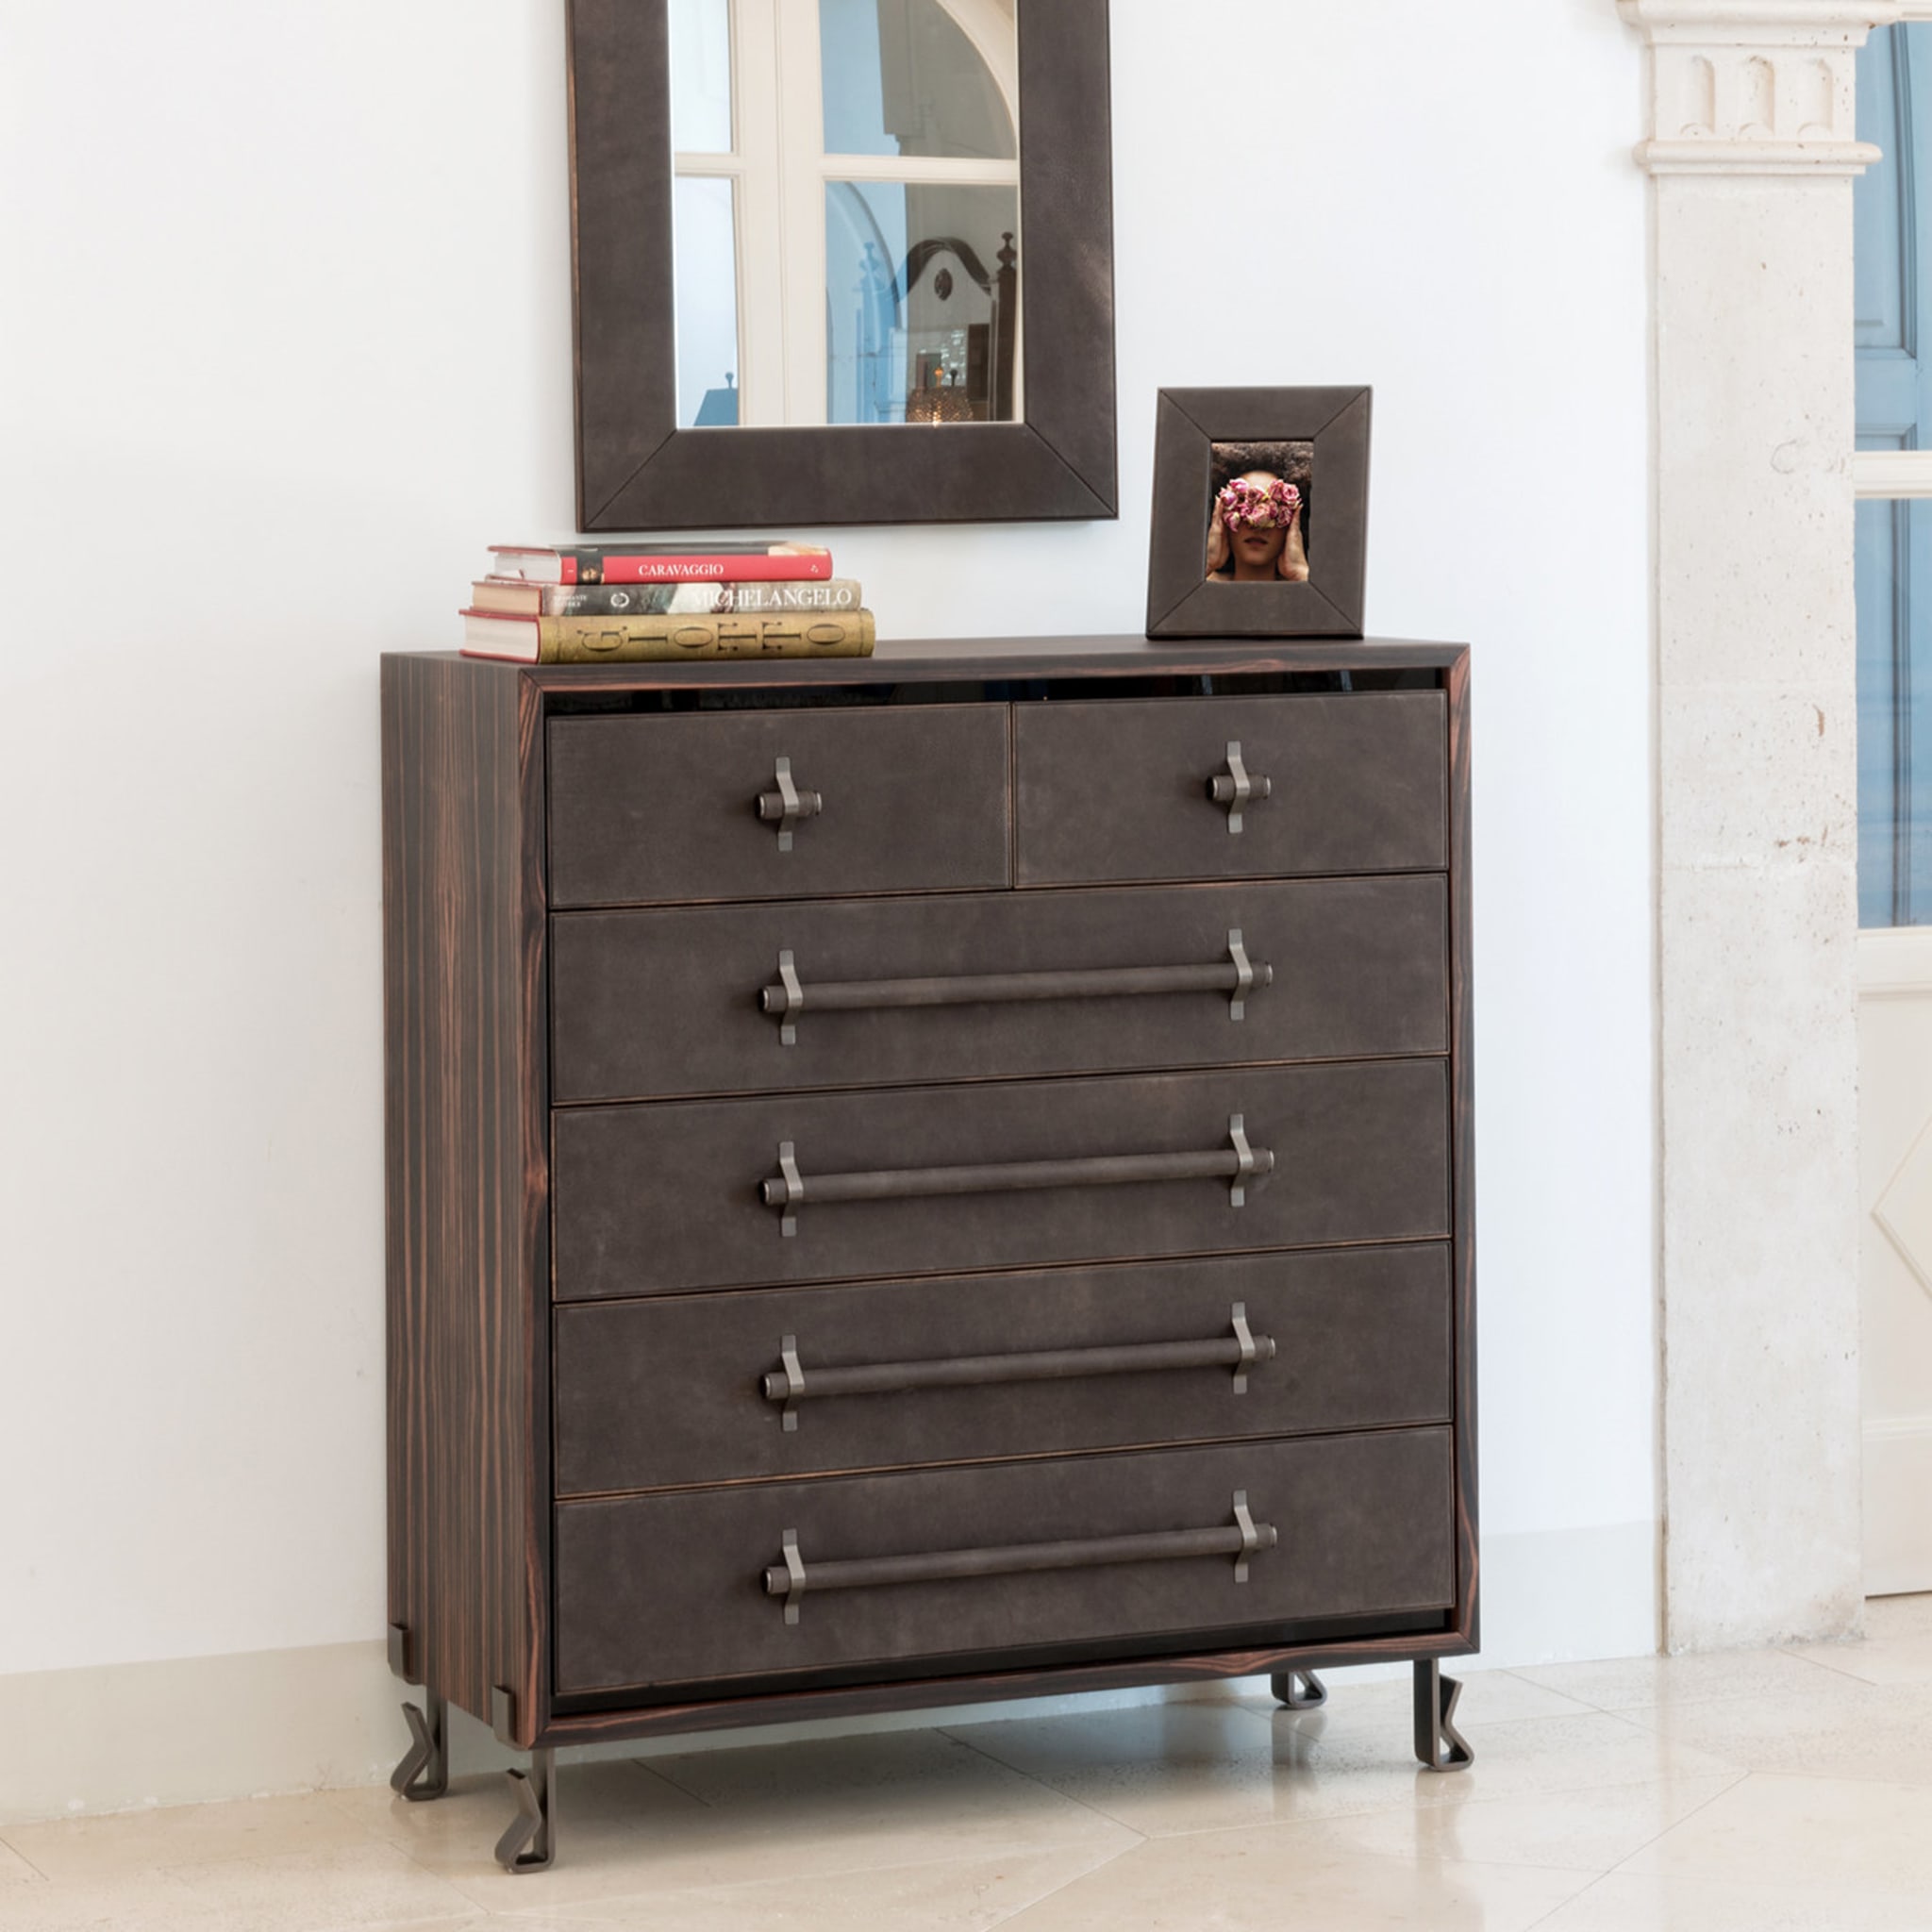 Settimo Ebony Chest of Drawers by Michael Schoeller - Alternative view 2